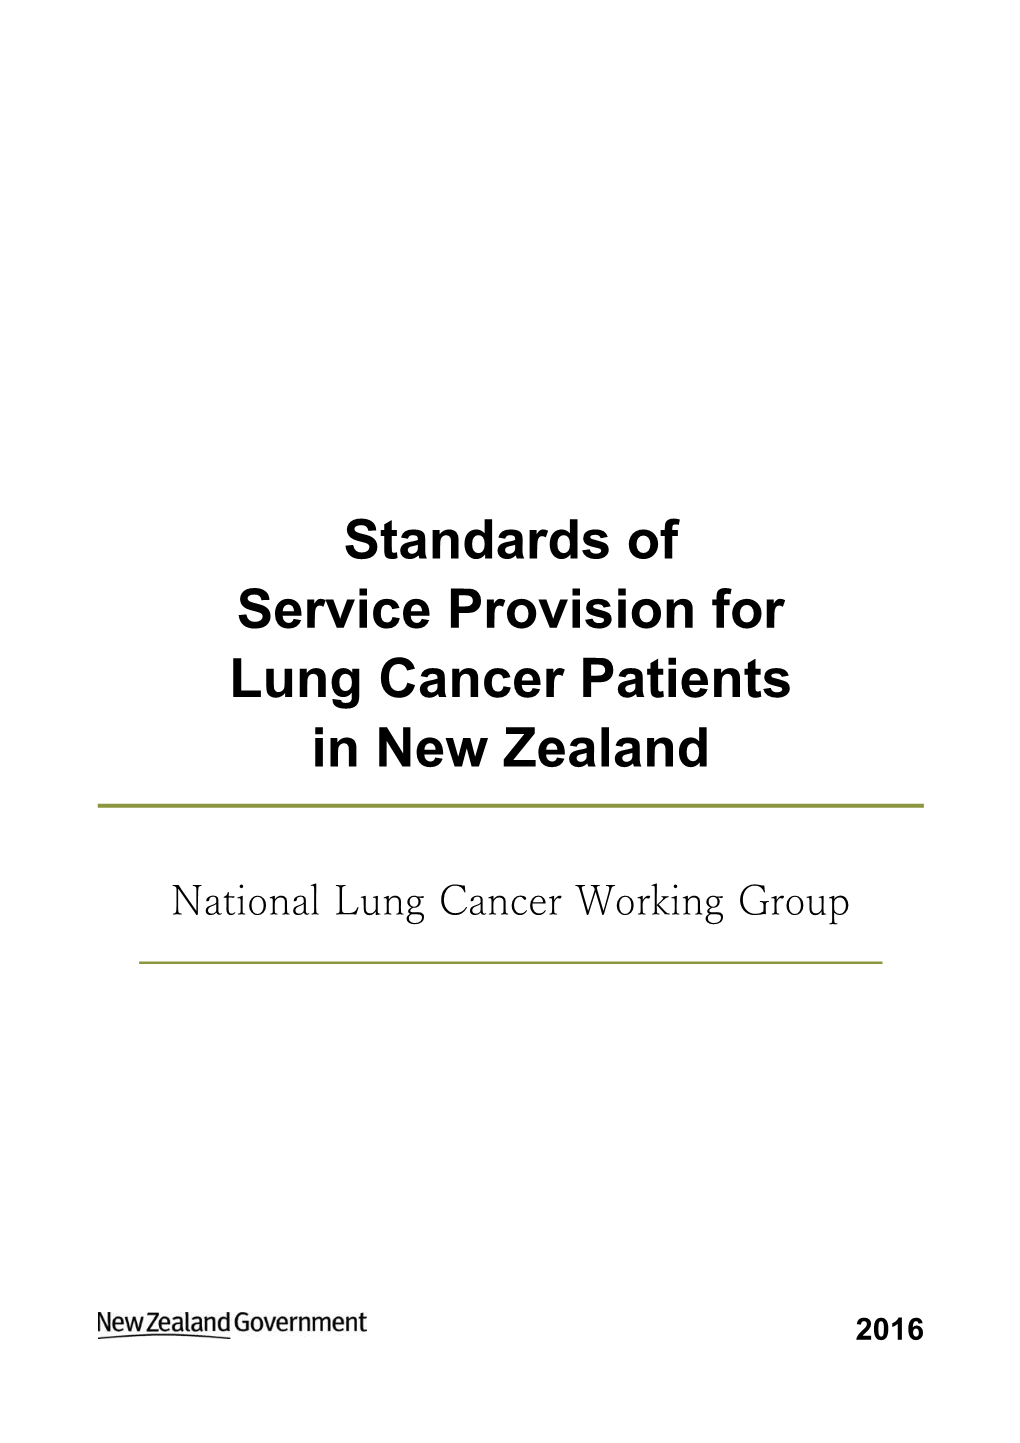 Standards of Service Provision for Lung Cancer Patients in New Zealand